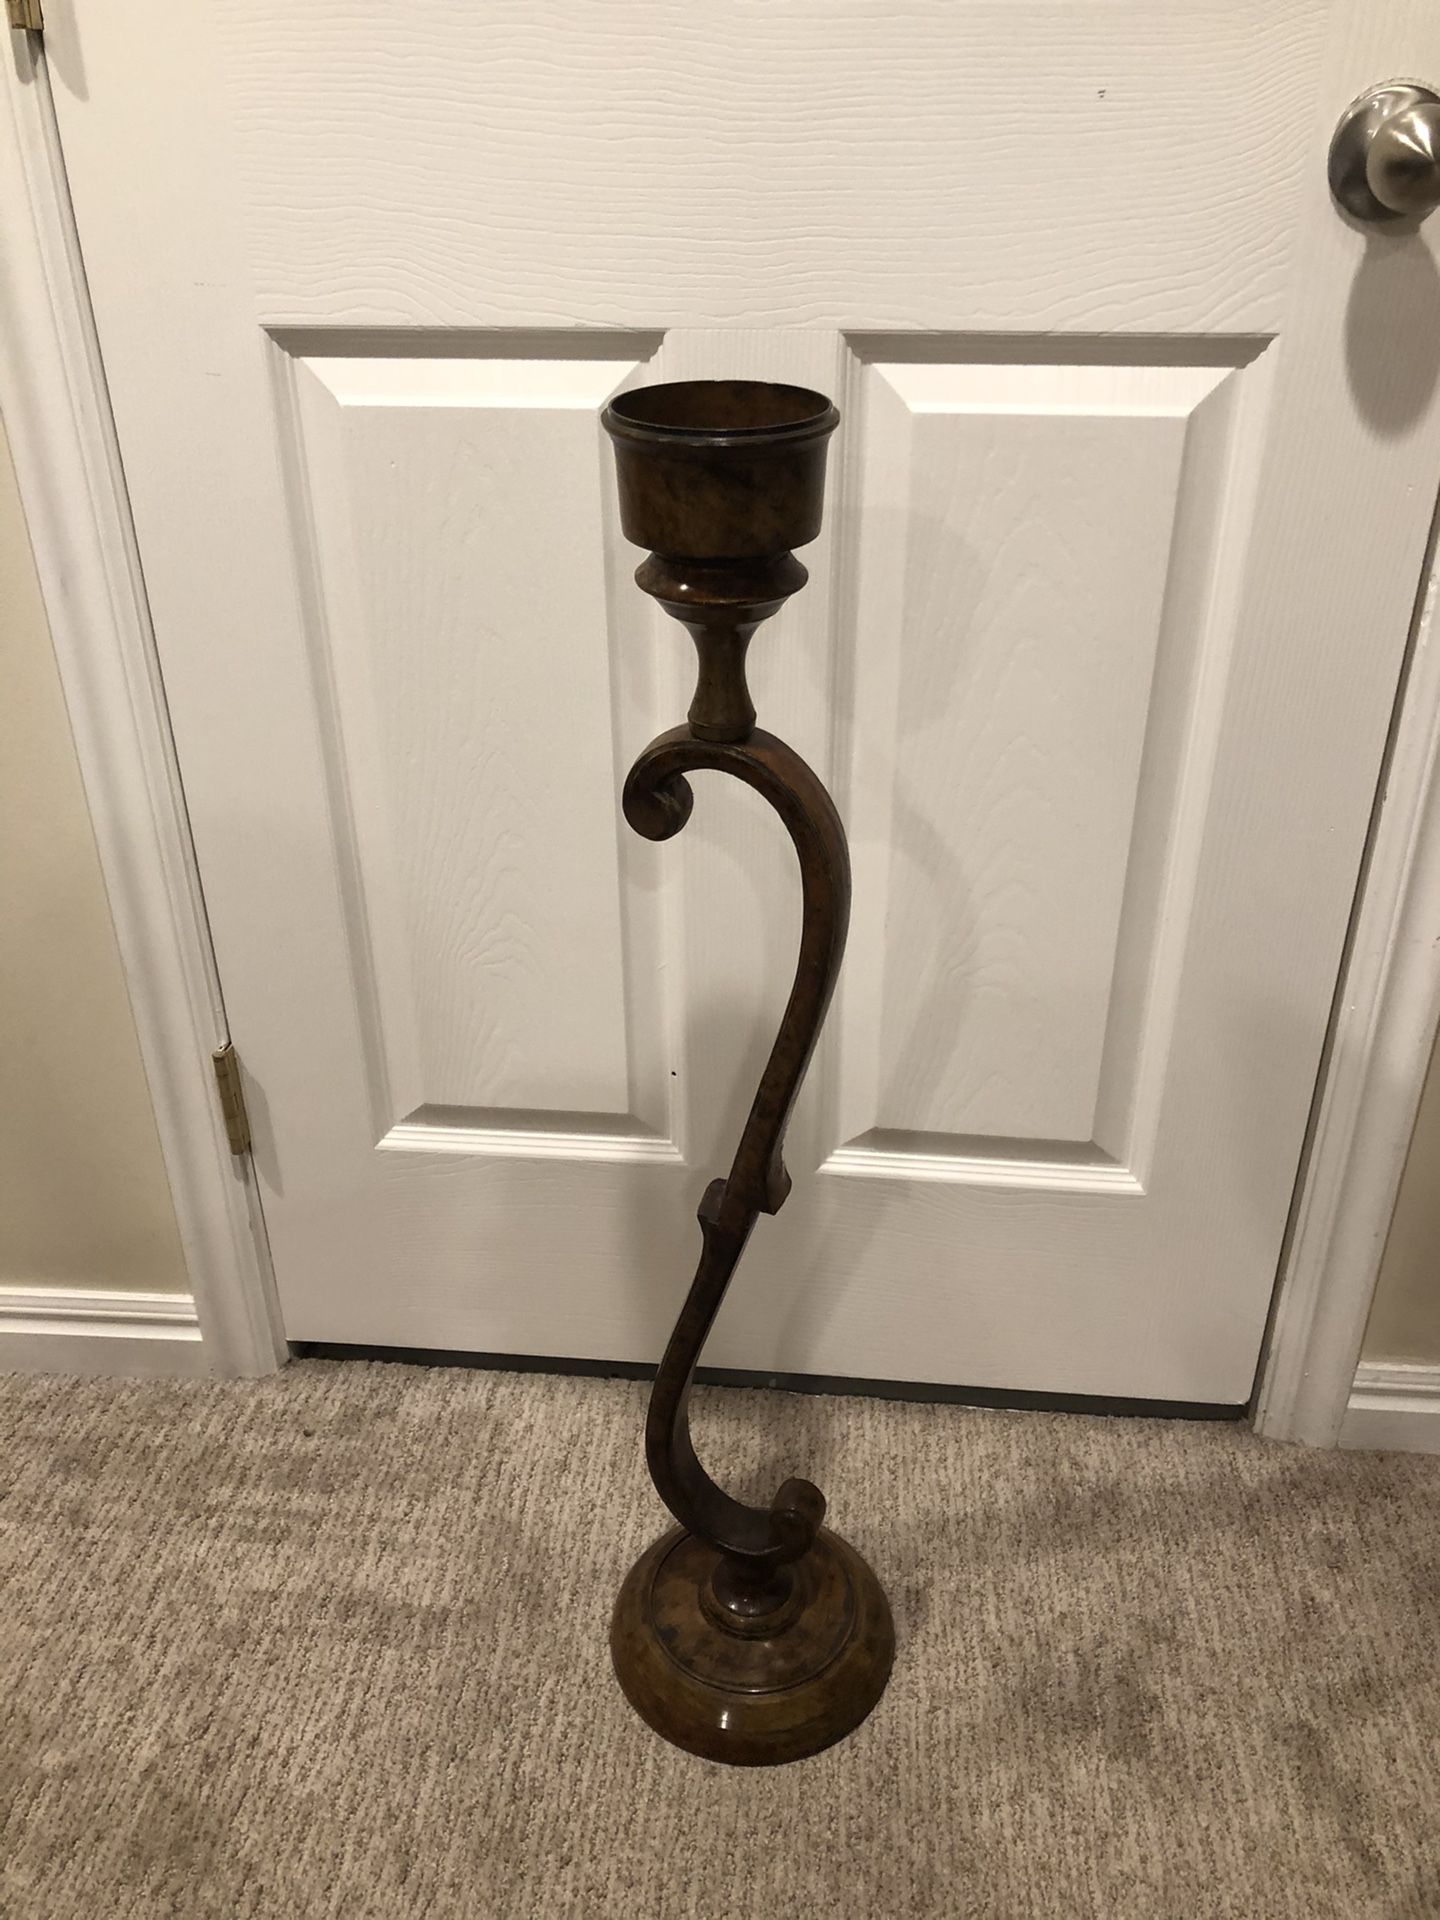 Gorgeous Large Scroll Candle Holder!